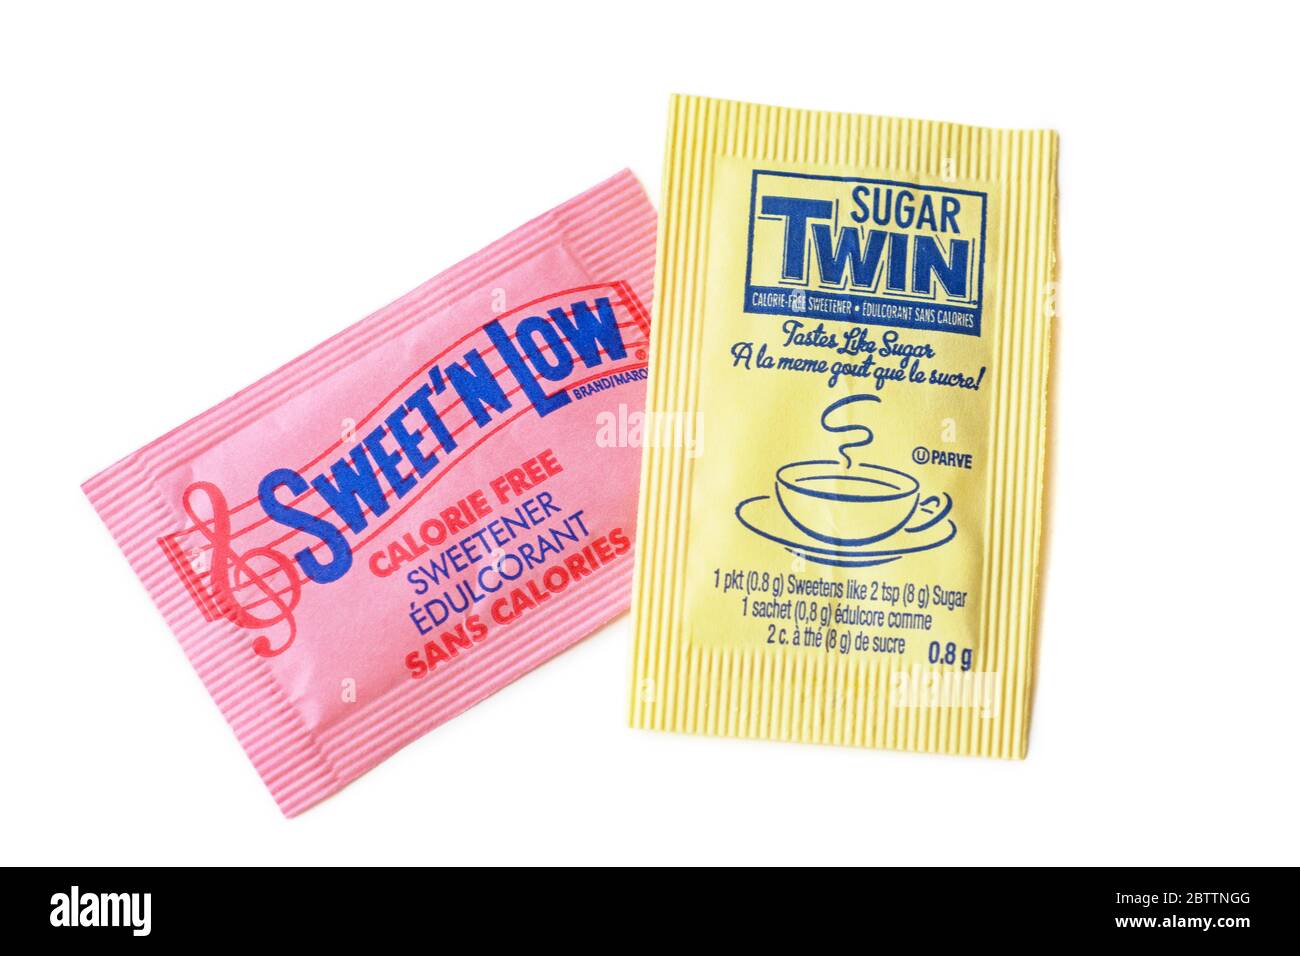 Artificial Sweetener, Sweet'N Low with Saccharin and Sugar Twin with Aspartame Stock Photo